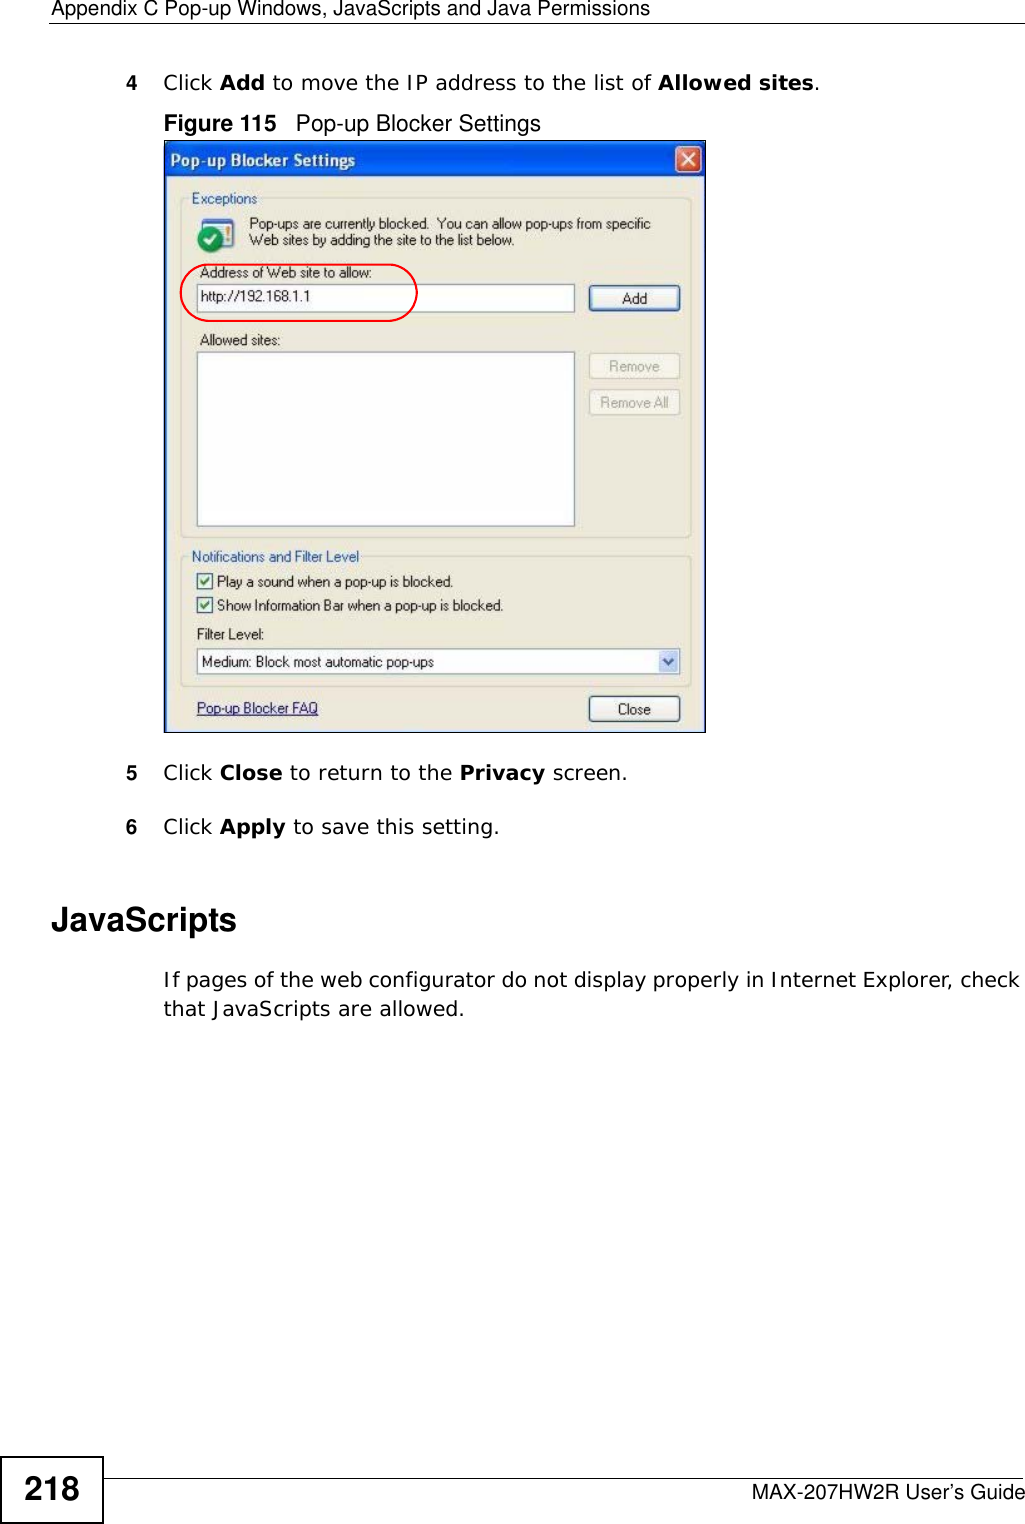 Appendix C Pop-up Windows, JavaScripts and Java PermissionsMAX-207HW2R User’s Guide2184Click Add to move the IP address to the list of Allowed sites.Figure 115   Pop-up Blocker Settings5Click Close to return to the Privacy screen. 6Click Apply to save this setting. JavaScriptsIf pages of the web configurator do not display properly in Internet Explorer, check that JavaScripts are allowed. 